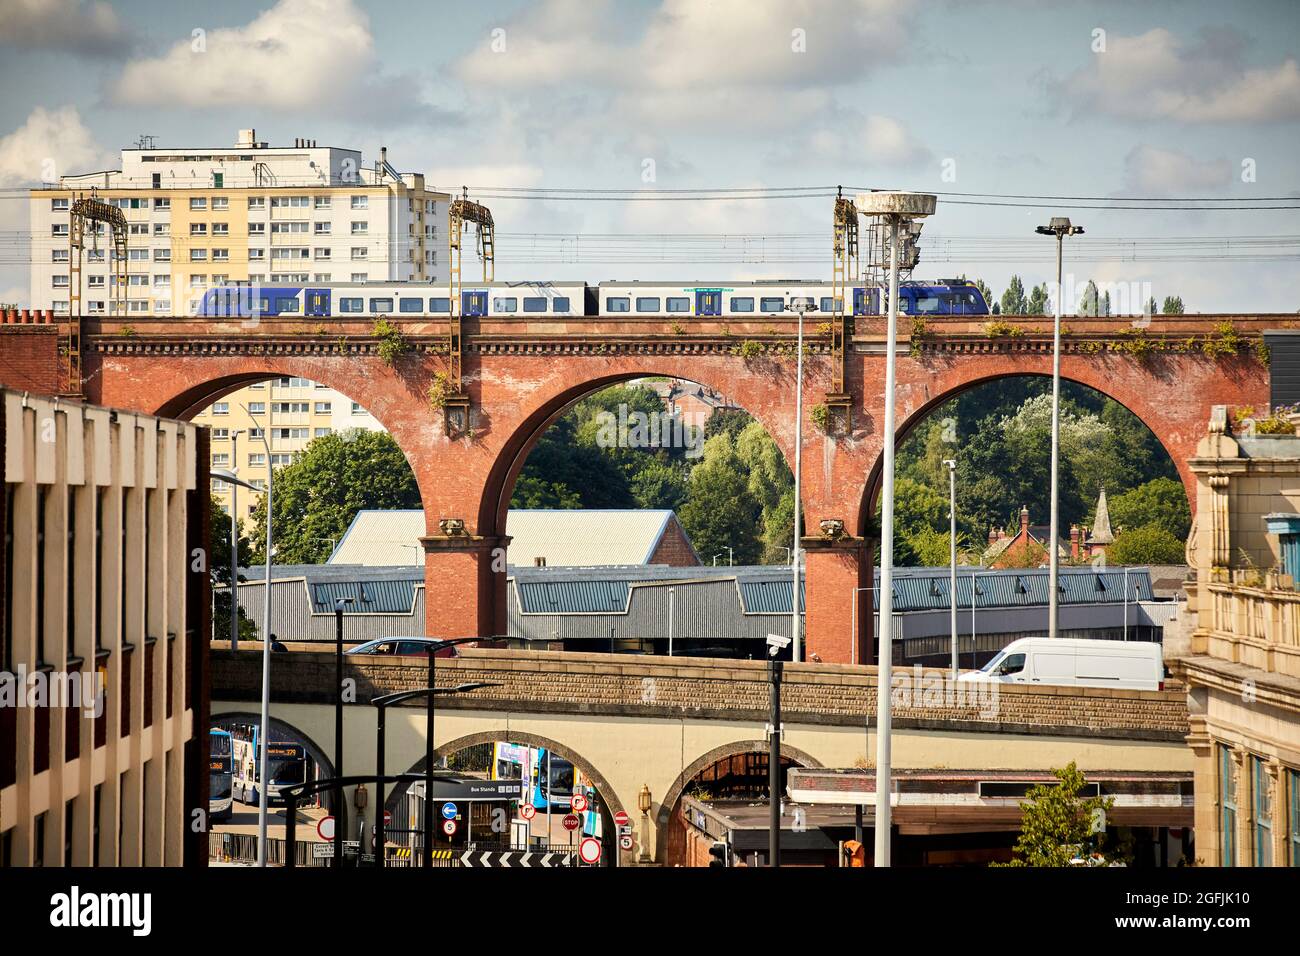 Stockport Wellington Road and the Landmark brick viaduct with Northern Trains Class 195/0 Stock Photo